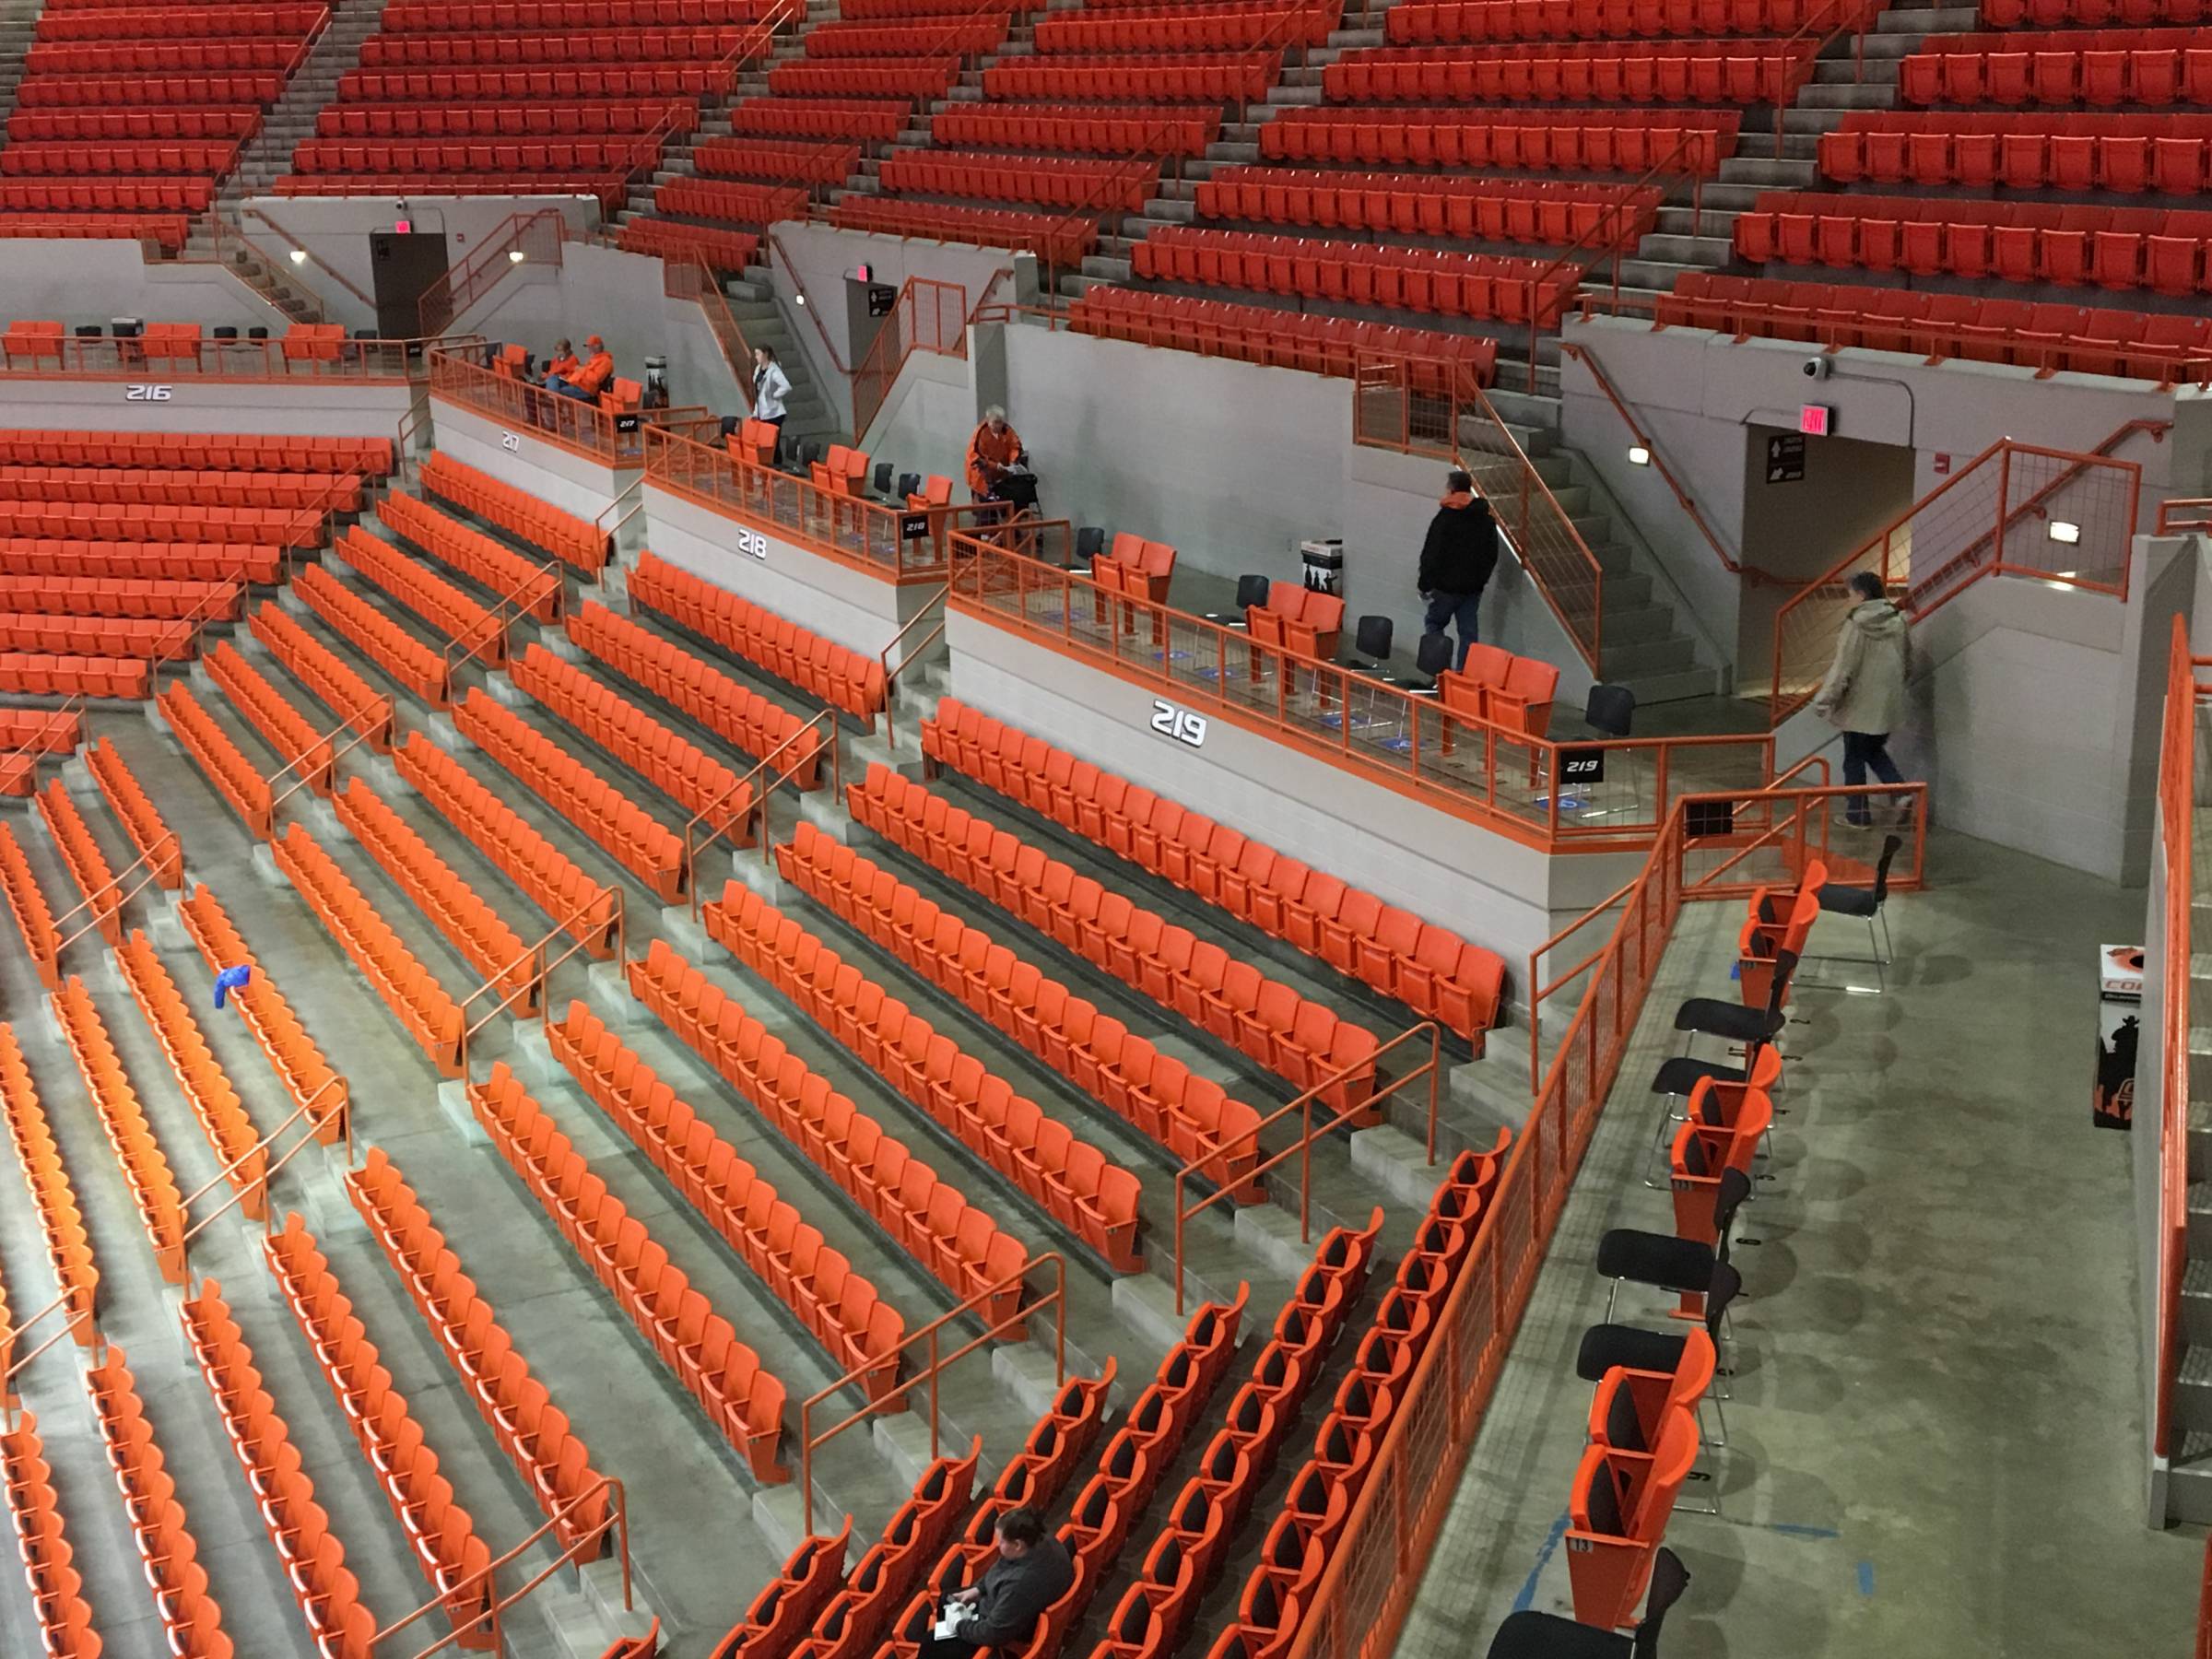 ADA Seating at Gallagher-Iba Arena